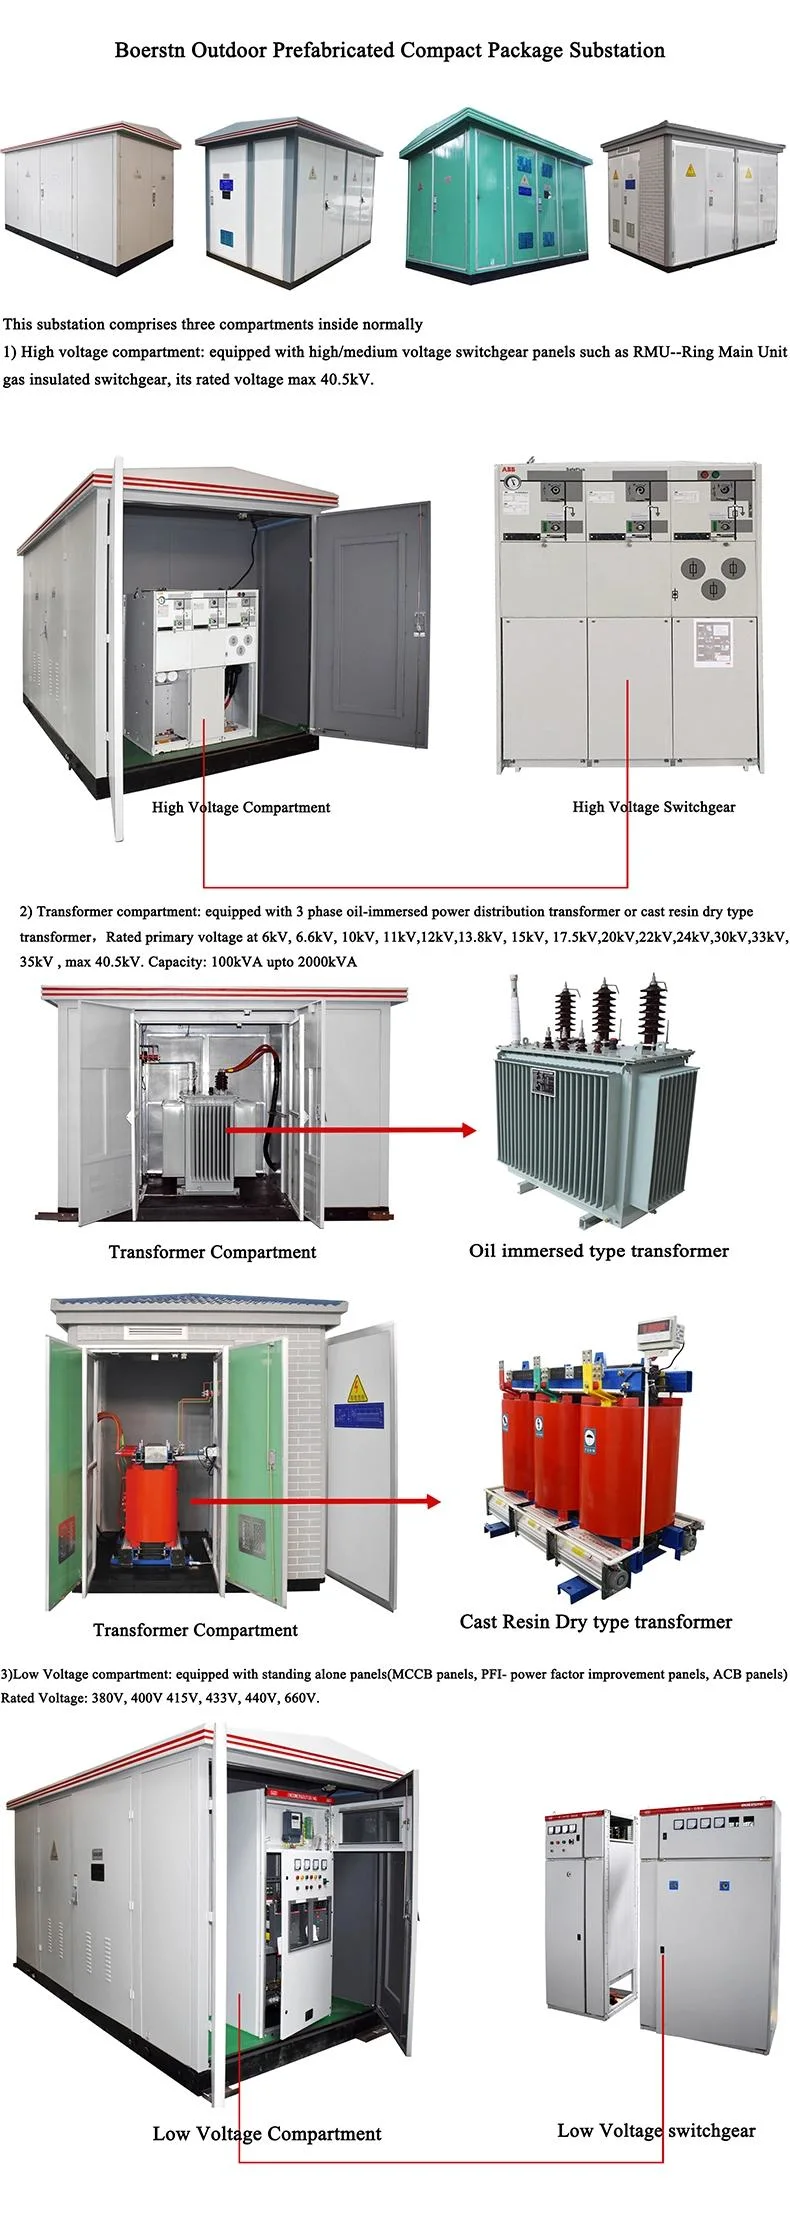 11kv 12kv 13.8kv Outdoor Prefabricated Compact Substation Include Mv LV Switchgear and Transformer Compartment